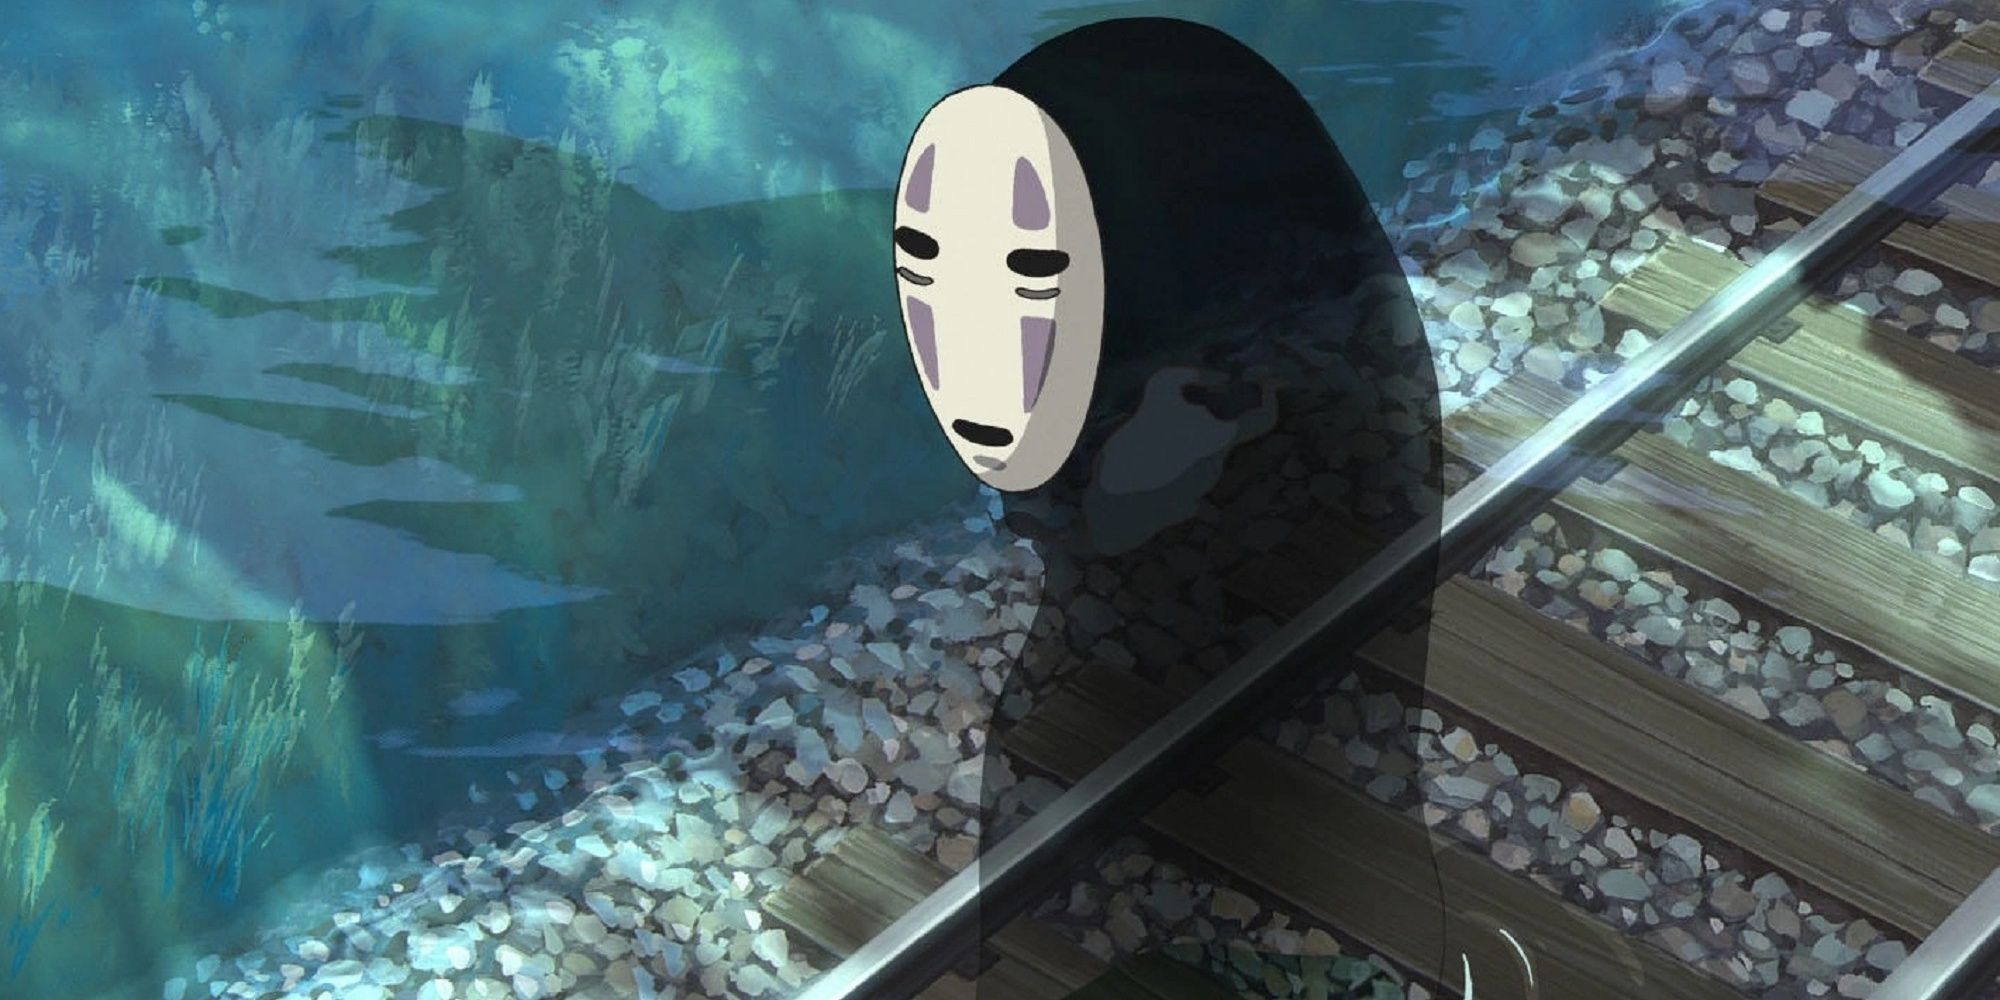 No-Face walking alone on the train tracks in the water in Spirited Away.